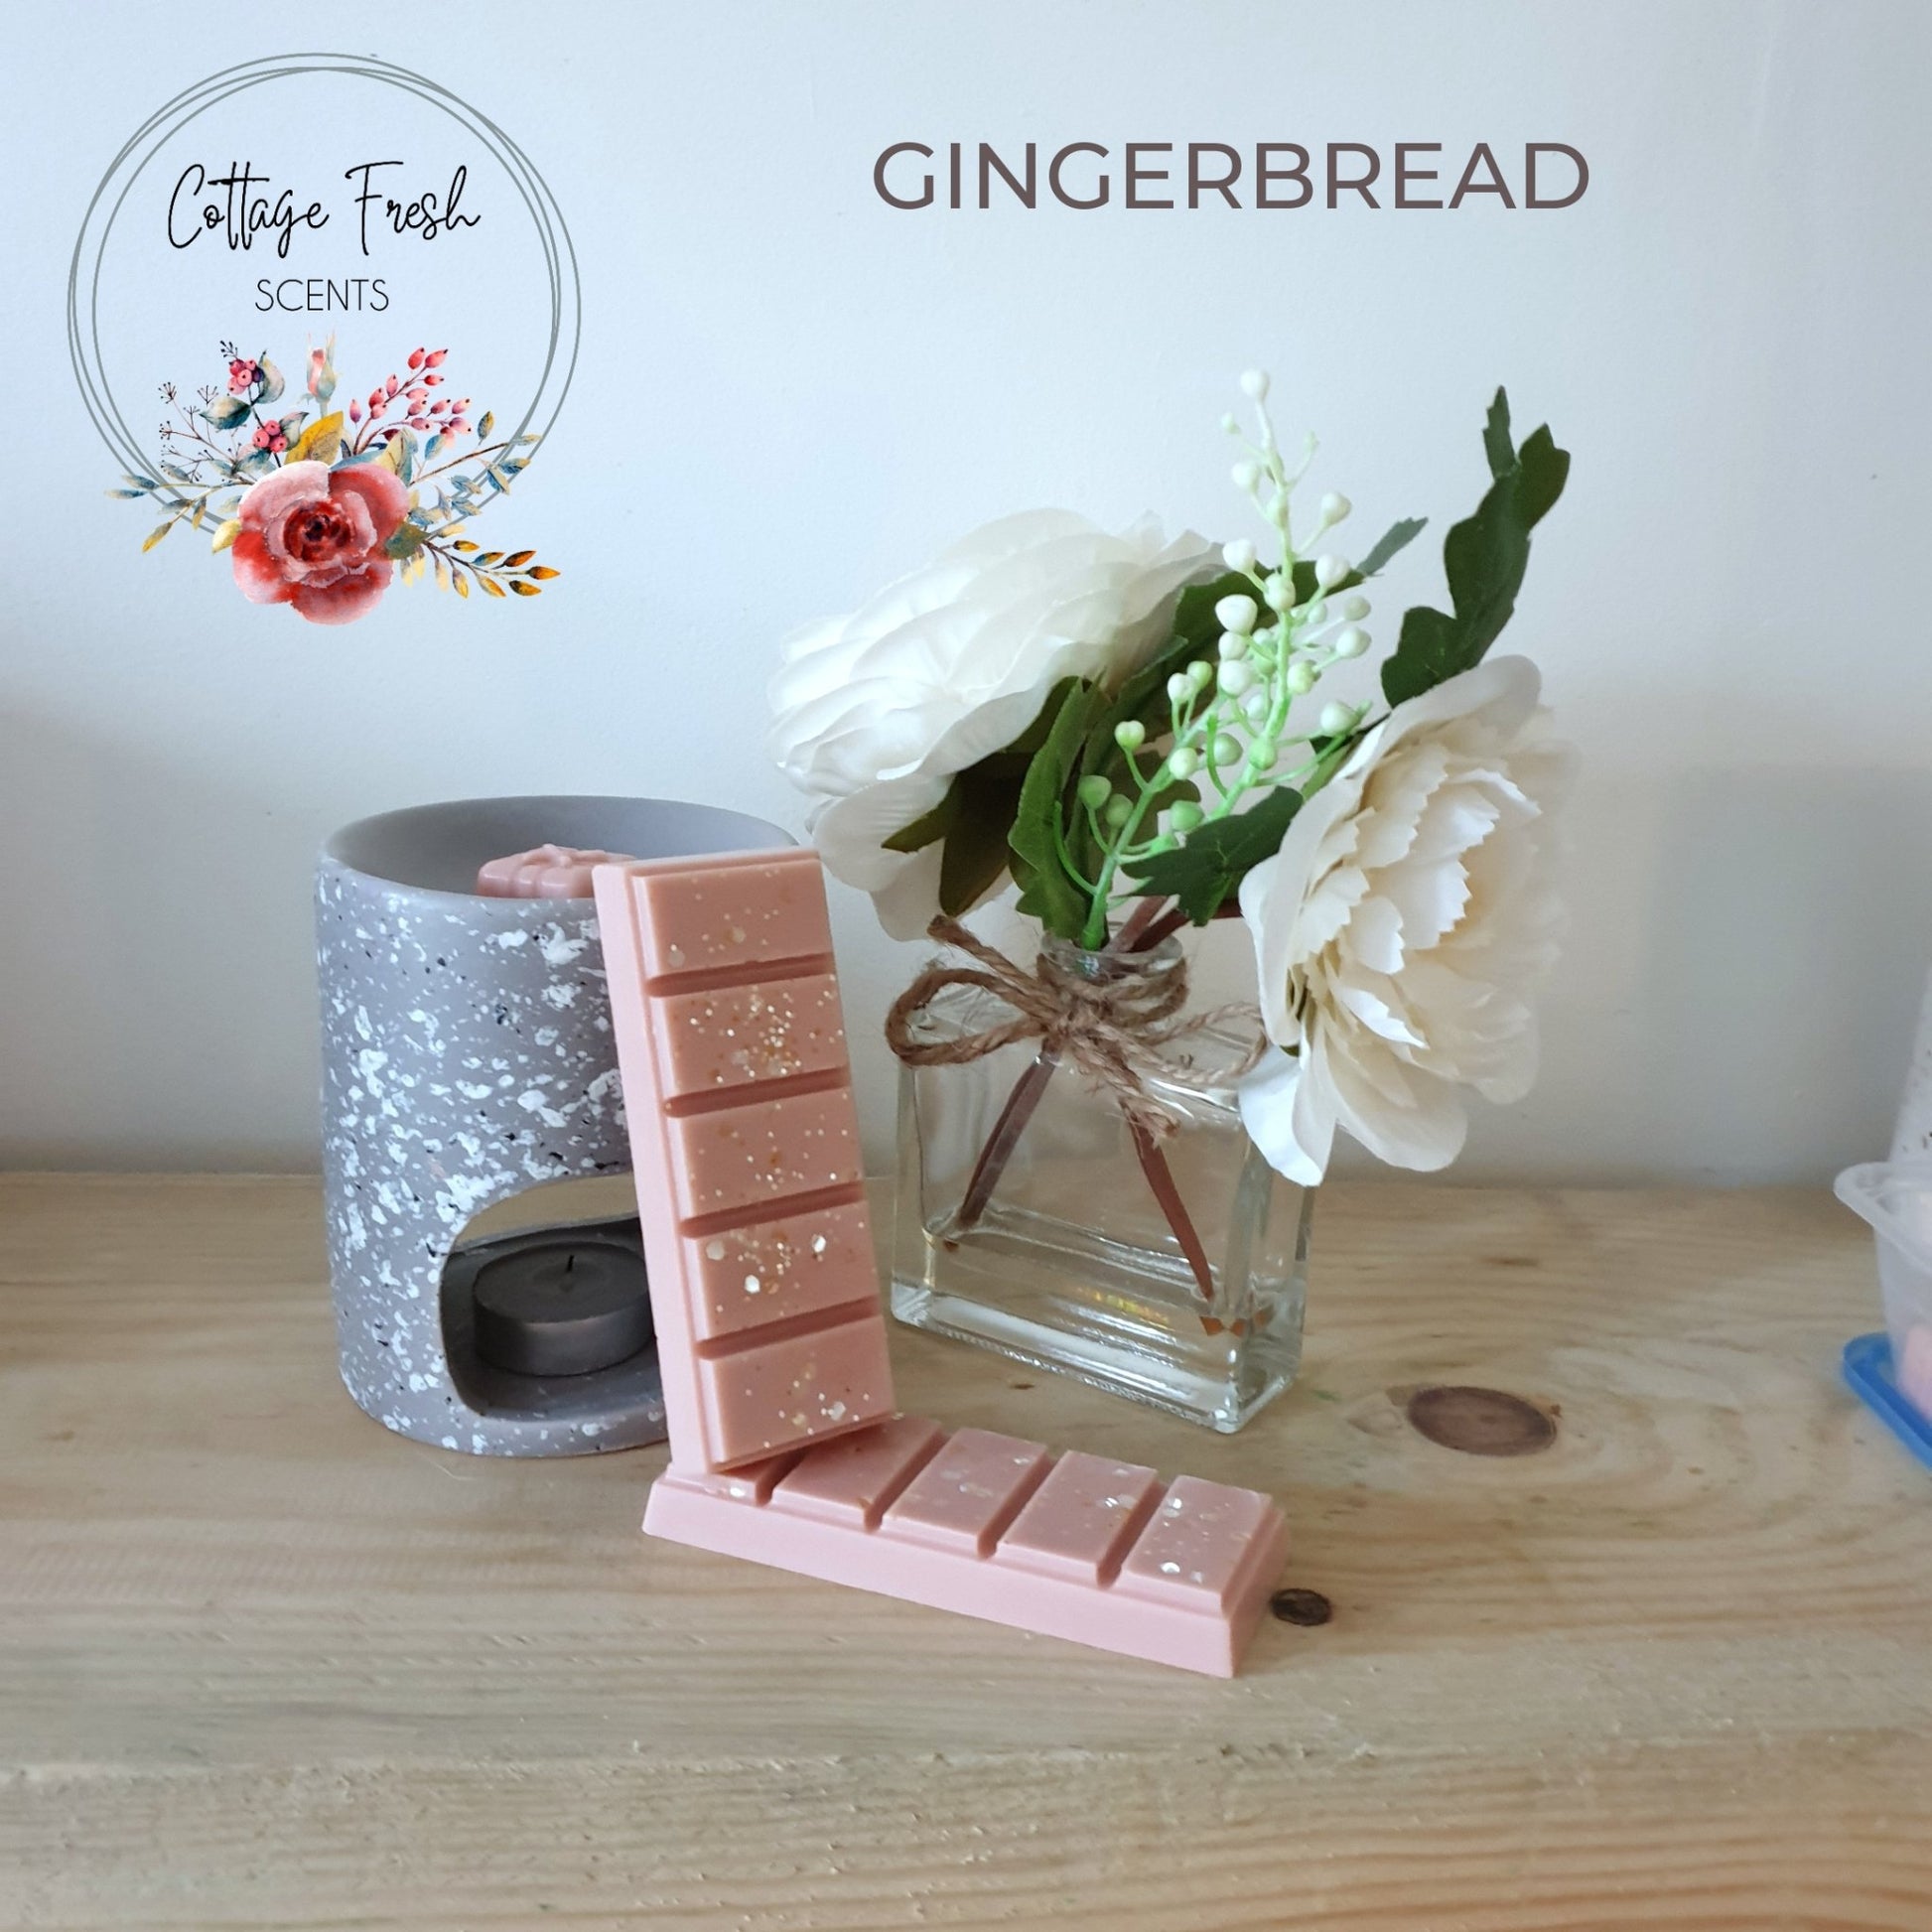 Gingerbread Wax Melt - Cottage Fresh Scents